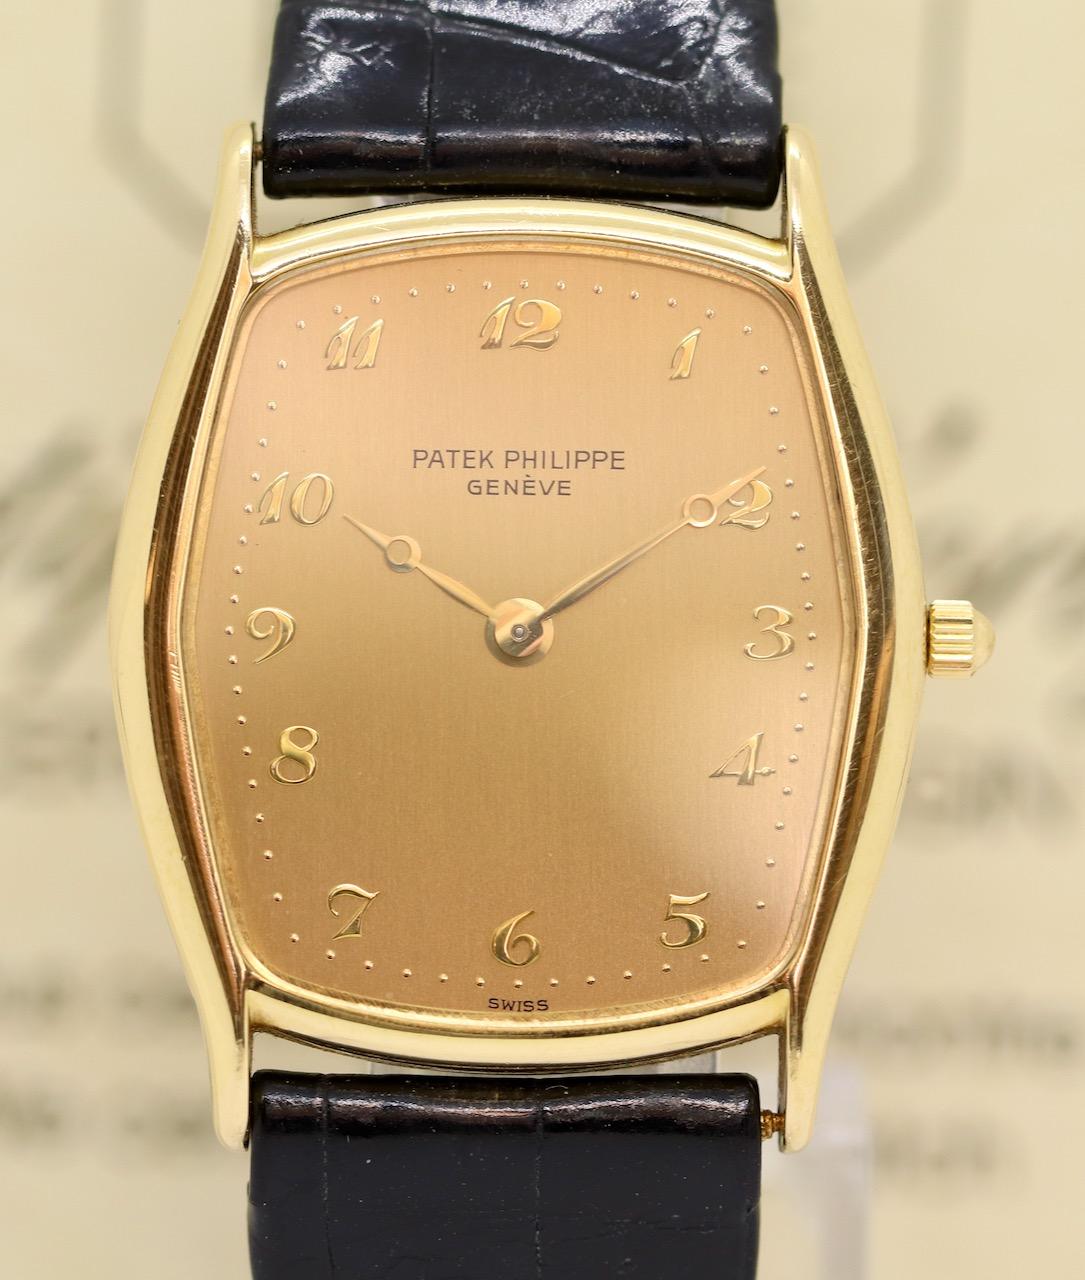 This Patek Philippe watch is a prime example of the luxury and precision one would expect from one of the world's leading watch manufacturers. The watch is a true masterpiece of watchmaking, crafted from 18k gold, and reflects the brand's commitment